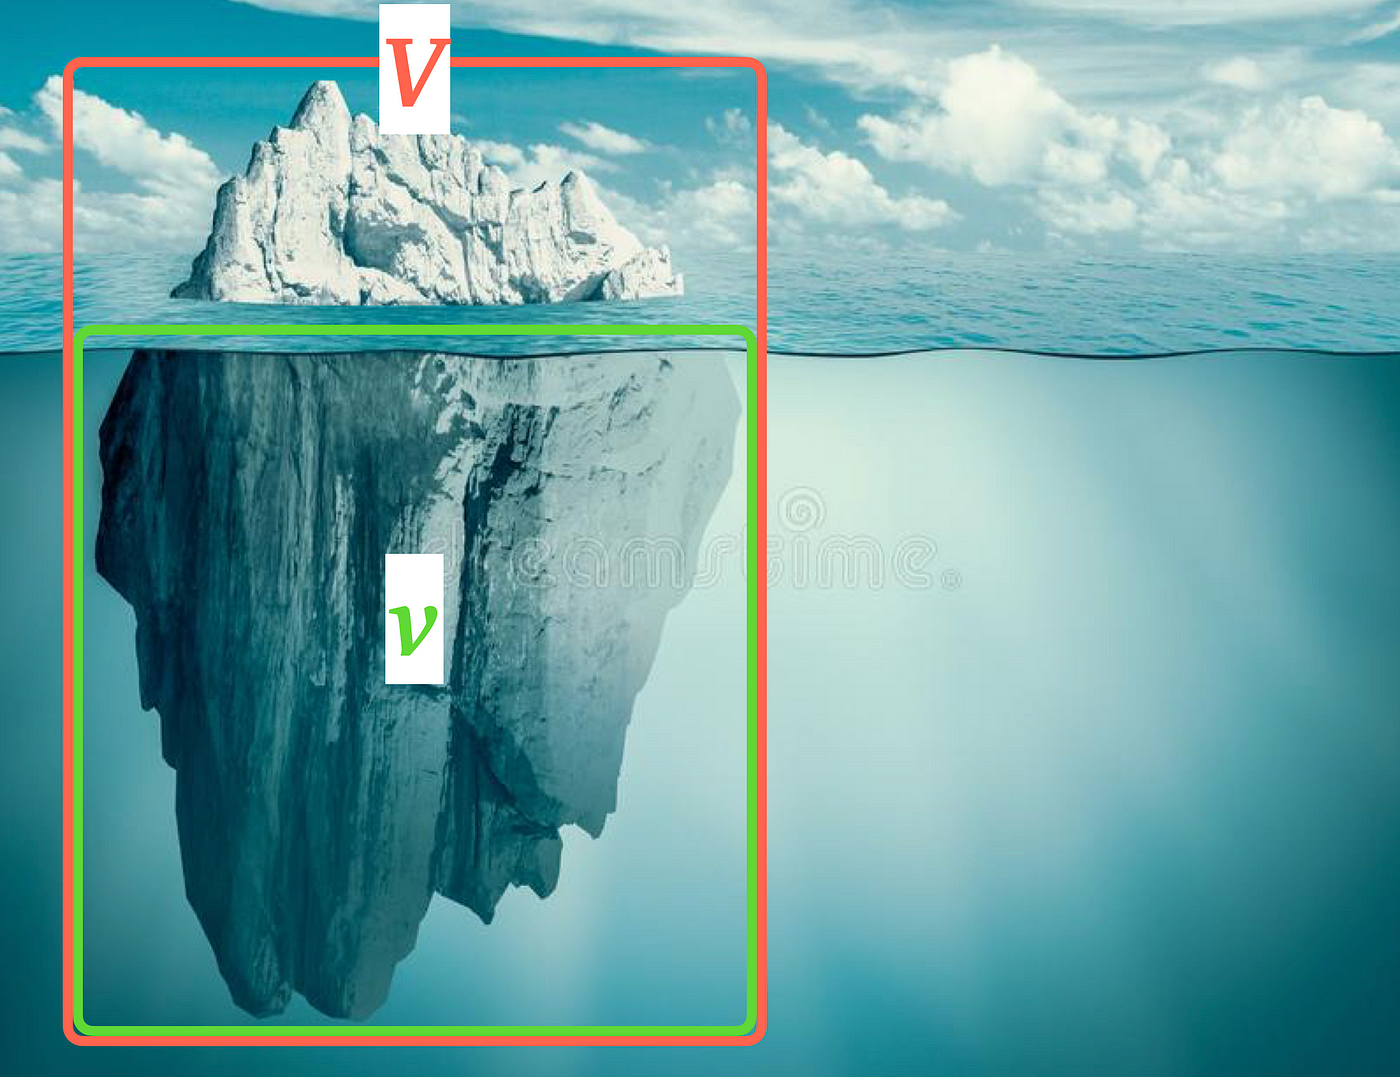 What Percentage Is the “Tip of the Iceberg”?